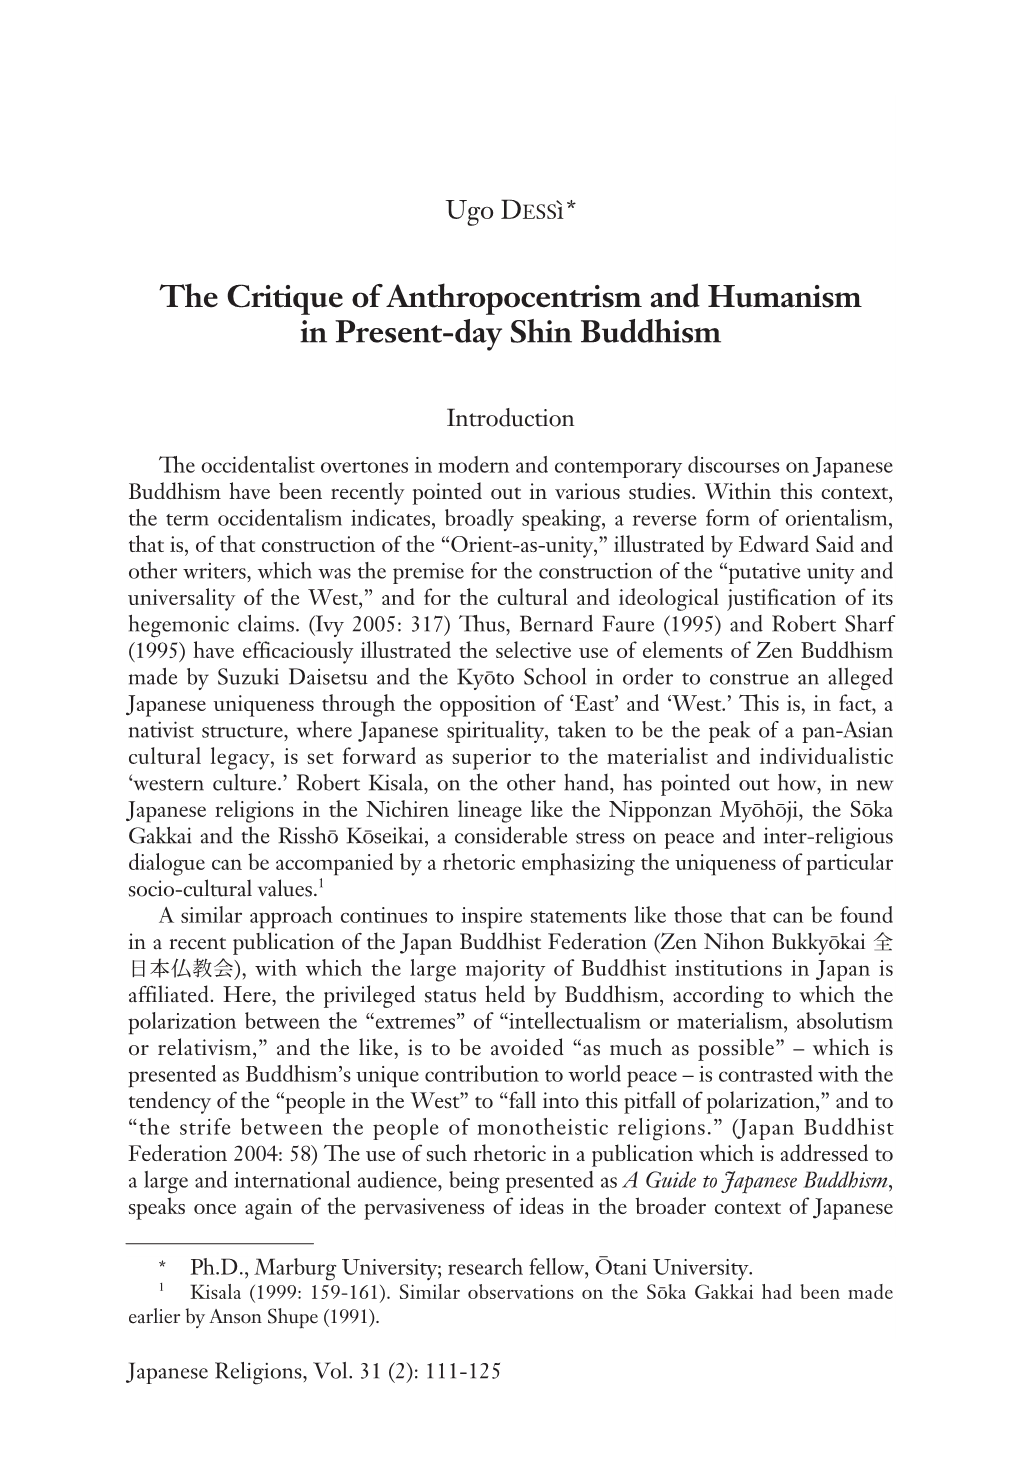 The Critique of Anthropocentrism and Humanism in Present-Day Shin Buddhism